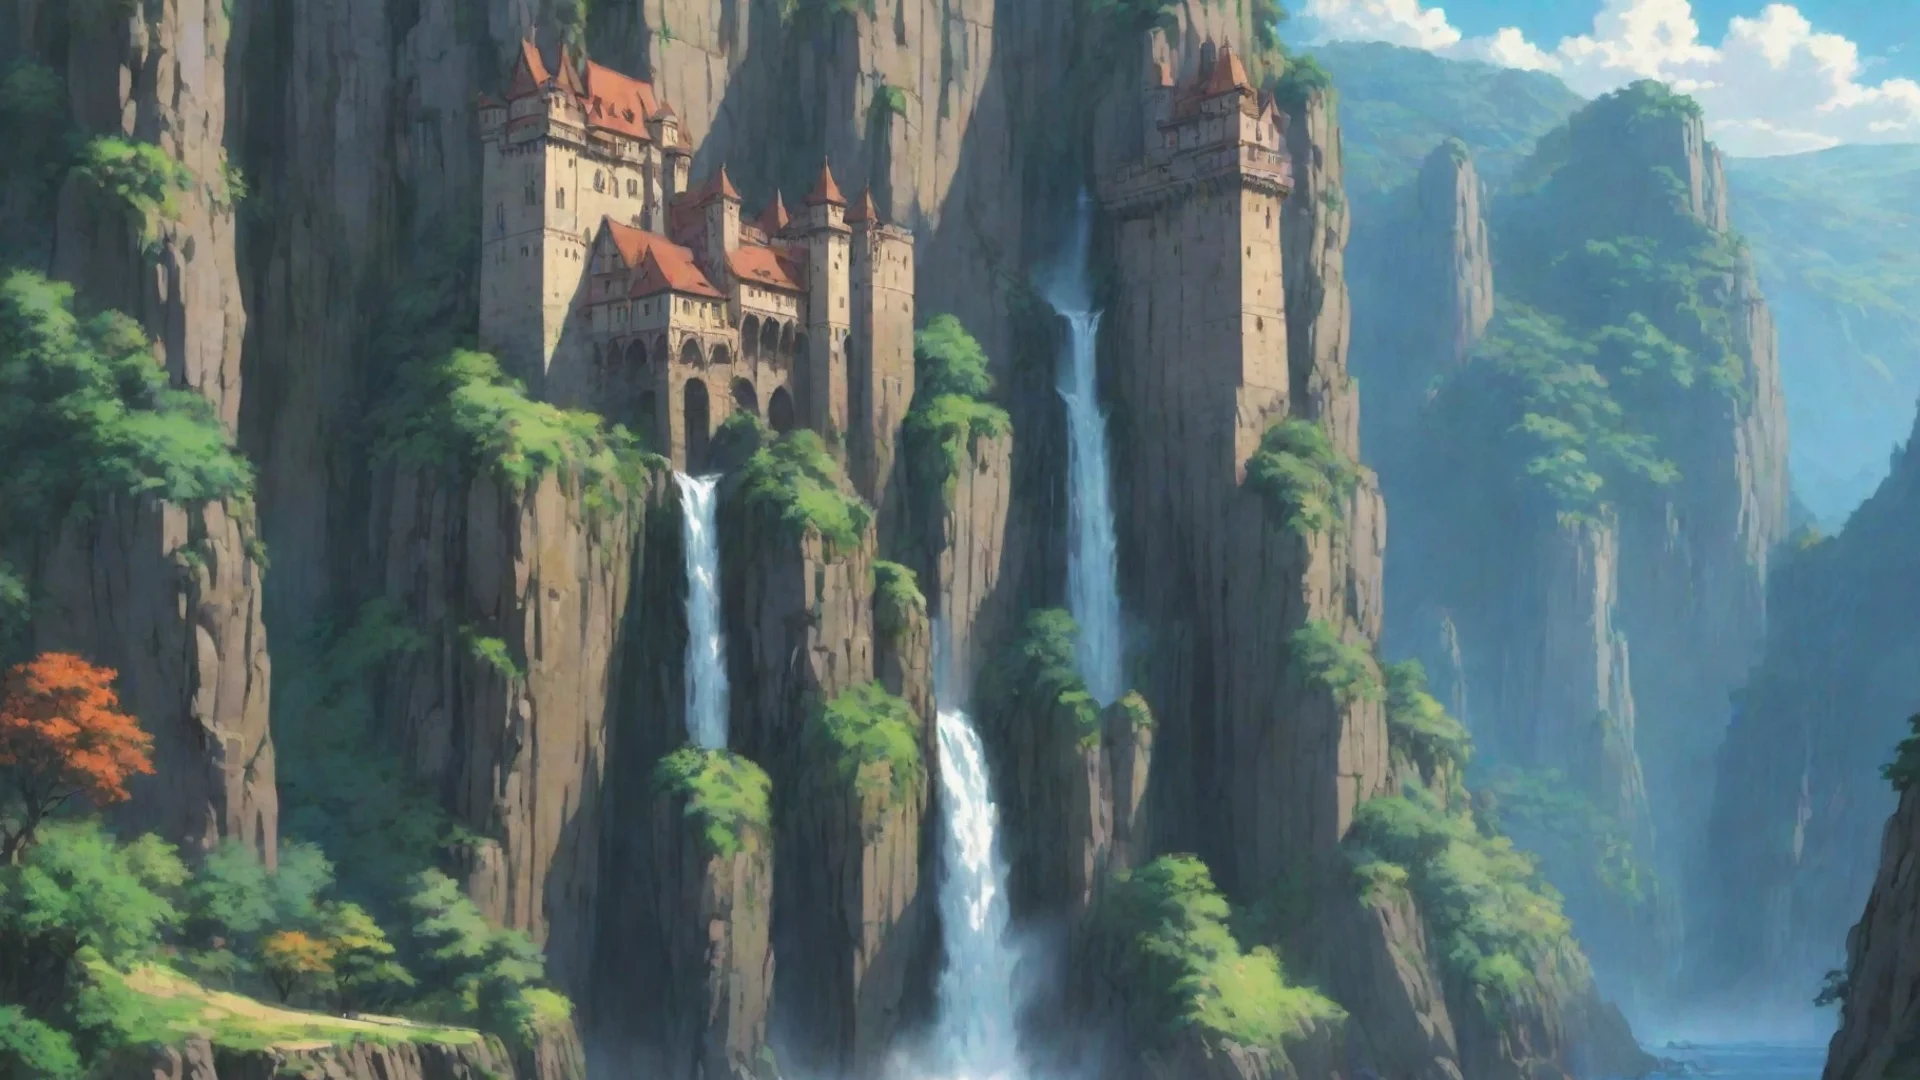 amazing amazing ghibli artistic castle cliff waterfall hd anime aesthetic beauty awesome portrait 2 wide